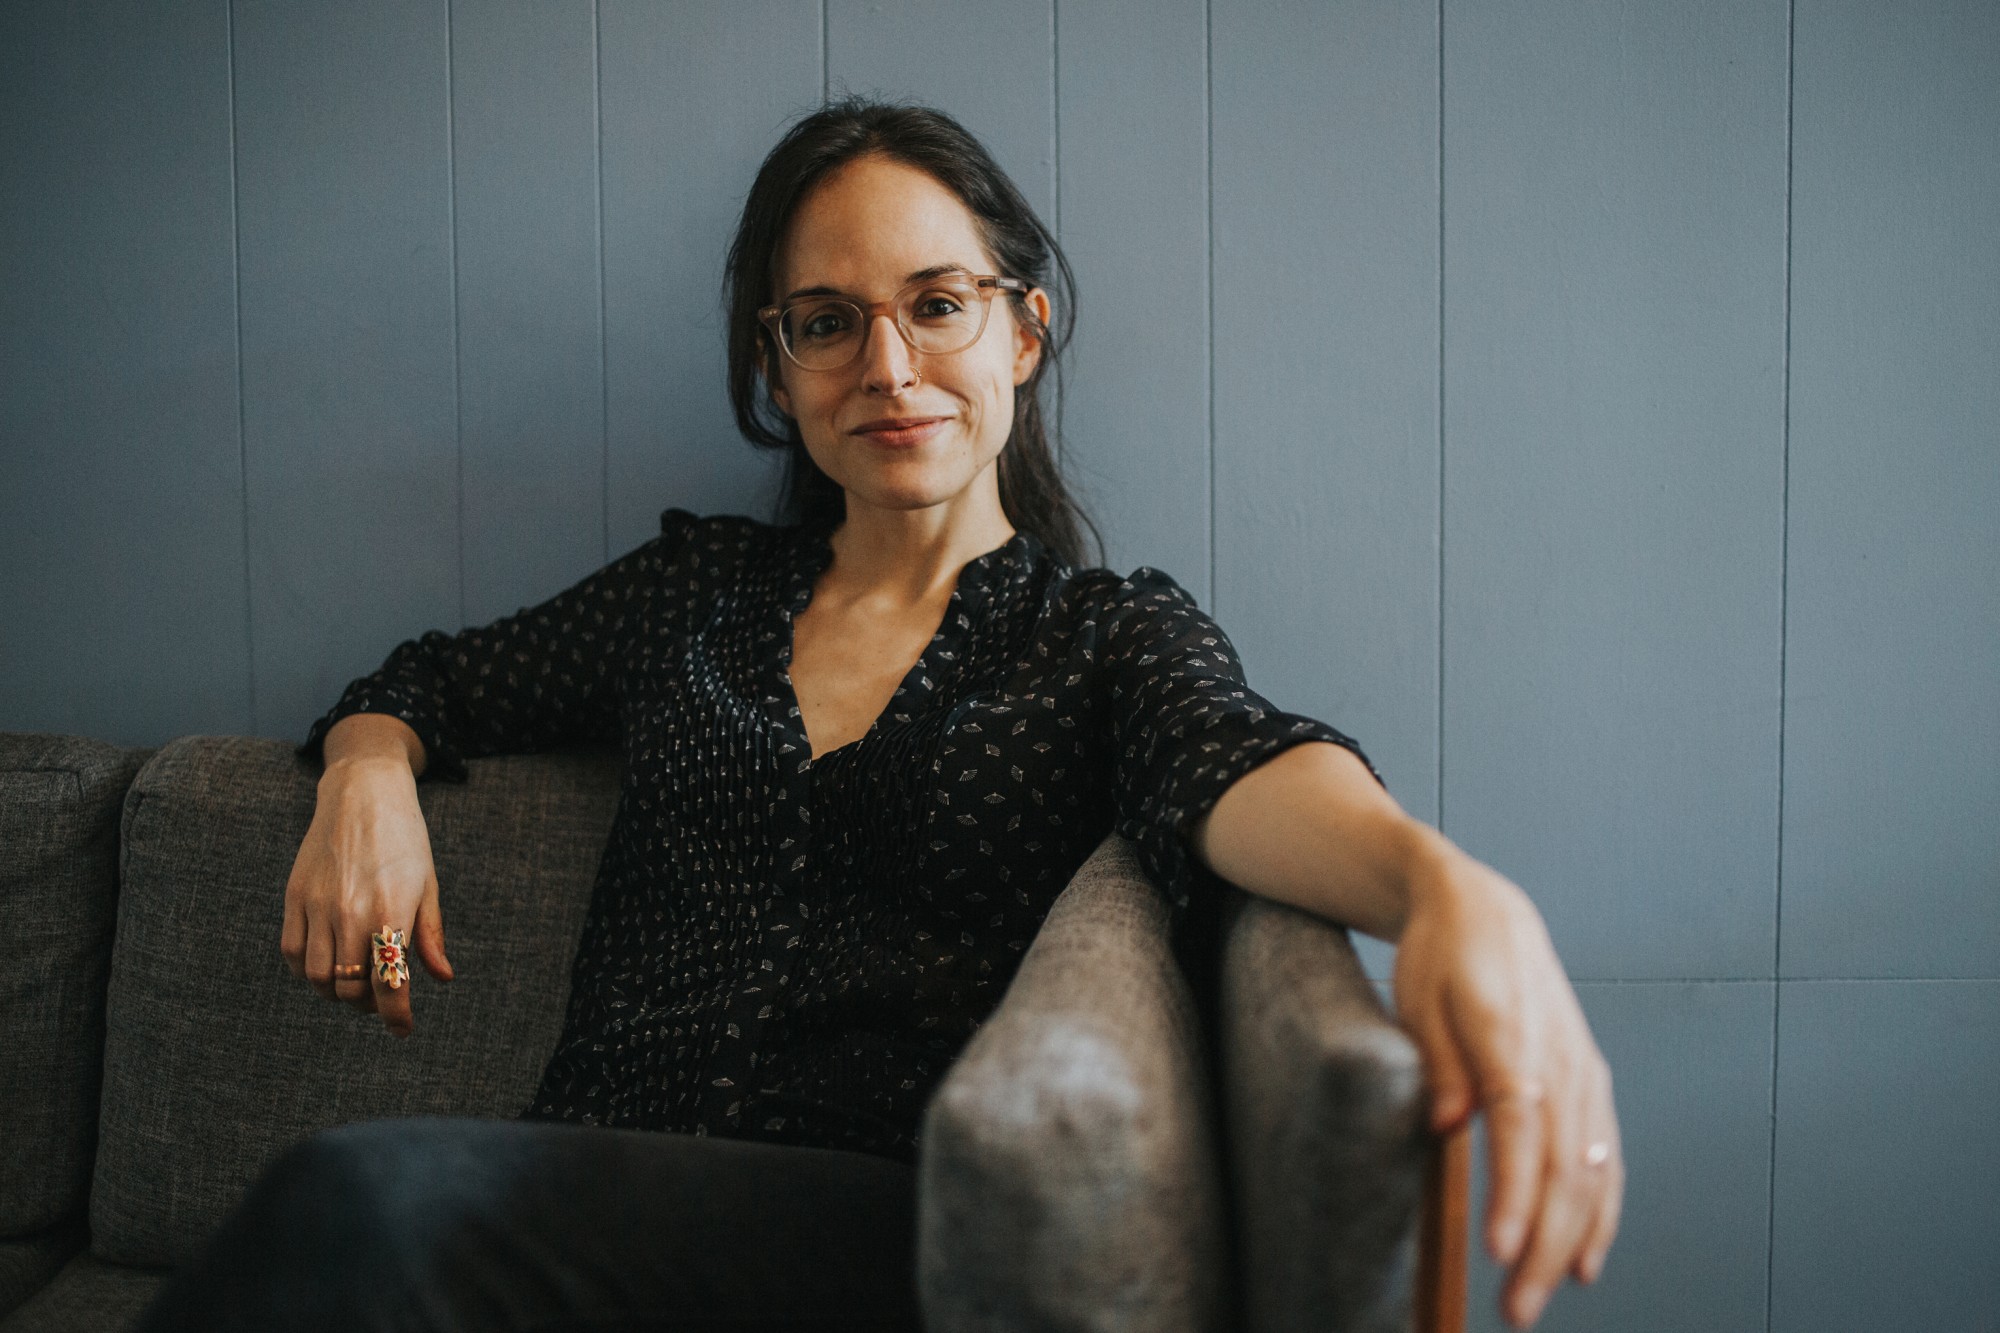 Robin, a white woman with long brown hair, is sitting on a gray couch against a blue background. She wears clear-framed glasses and a black V-necked blouse stamped with a white pattern. One arm rests on the back of the couch, while the other is extended along the armrest. She wears copper rings on several fingers.